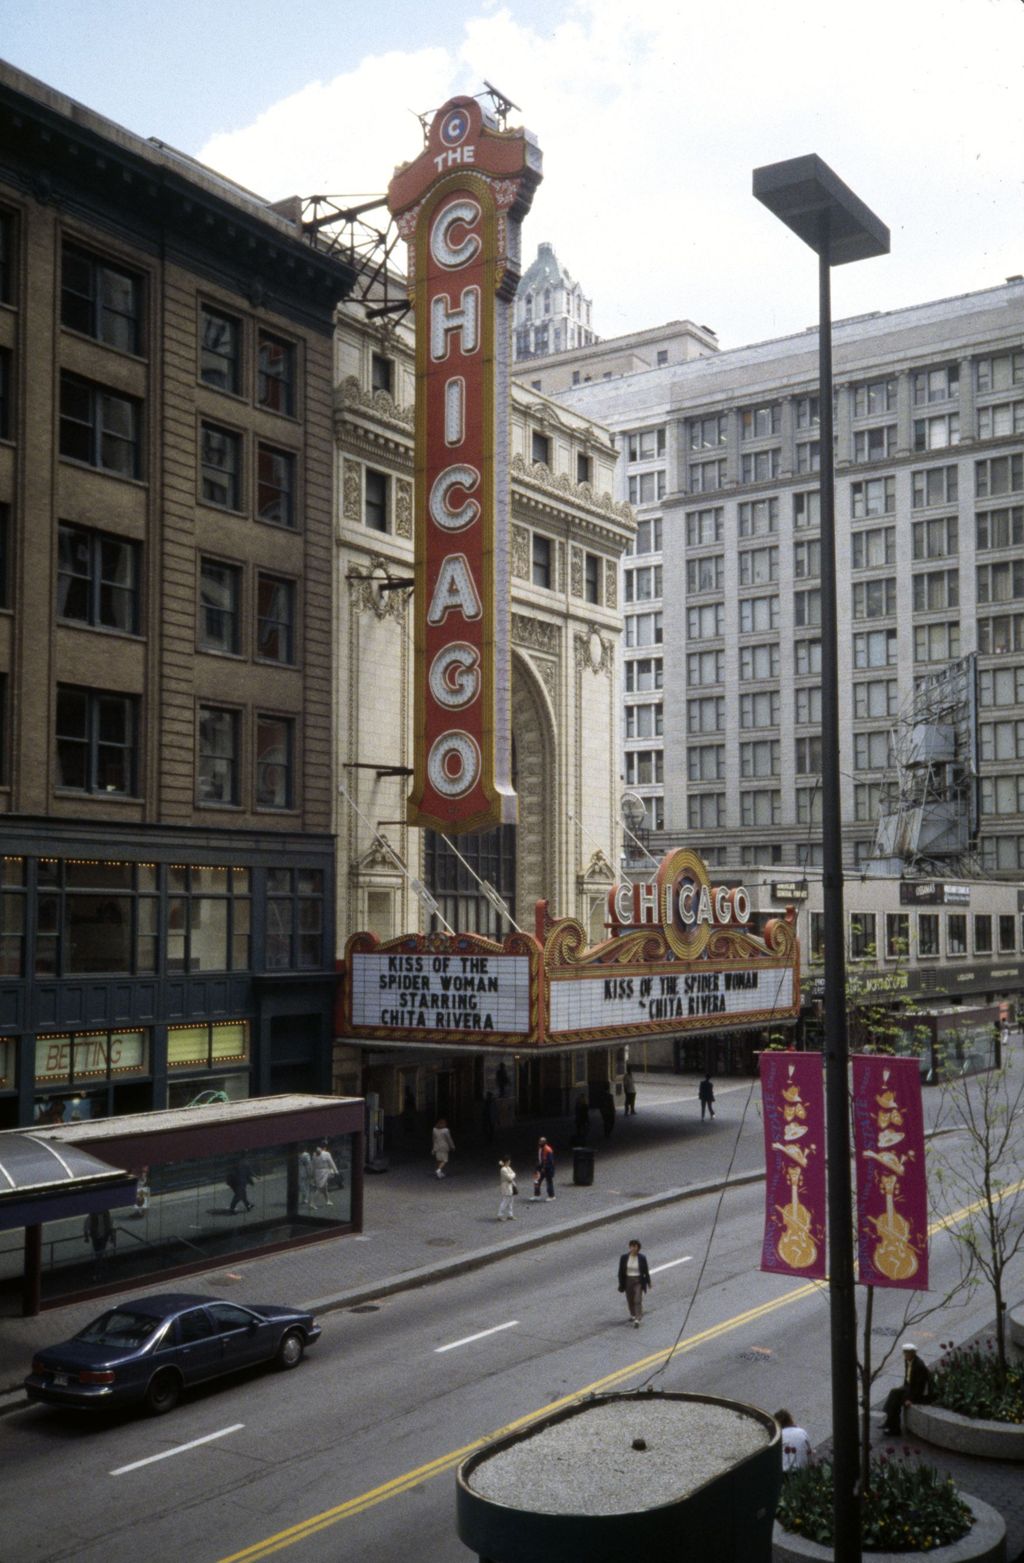 Chicago Theater and Marshall Field's store